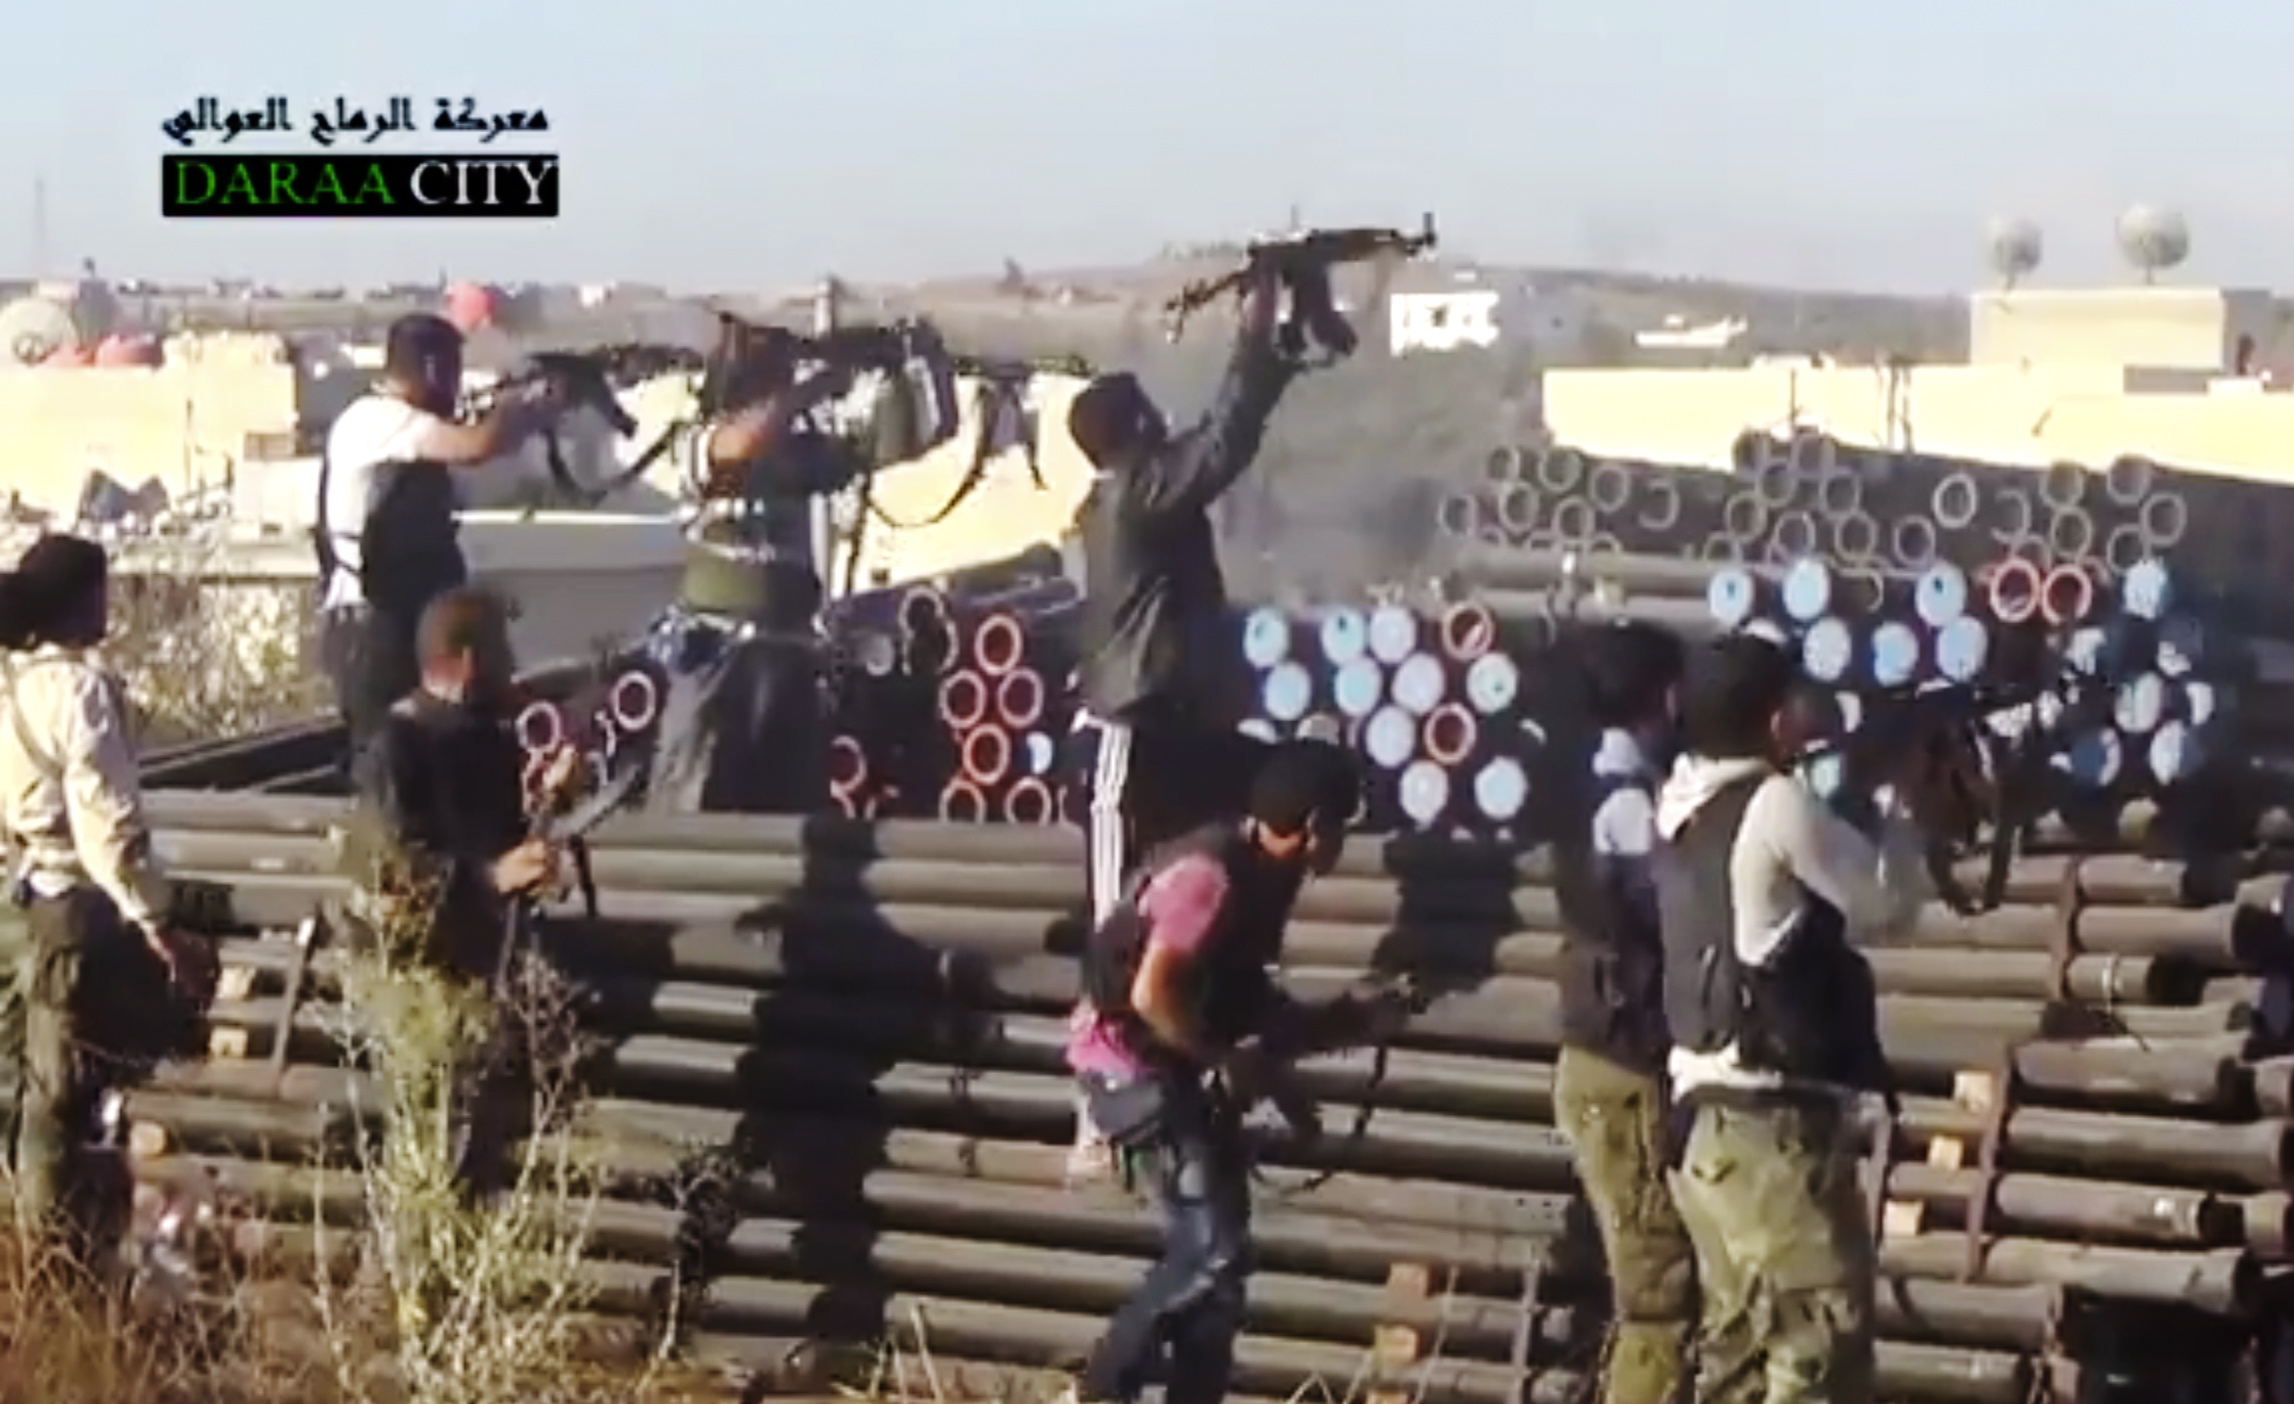 Syrian opposition fighters fire at government forces near Daraa customs in Daraa al-Balad, Syria.